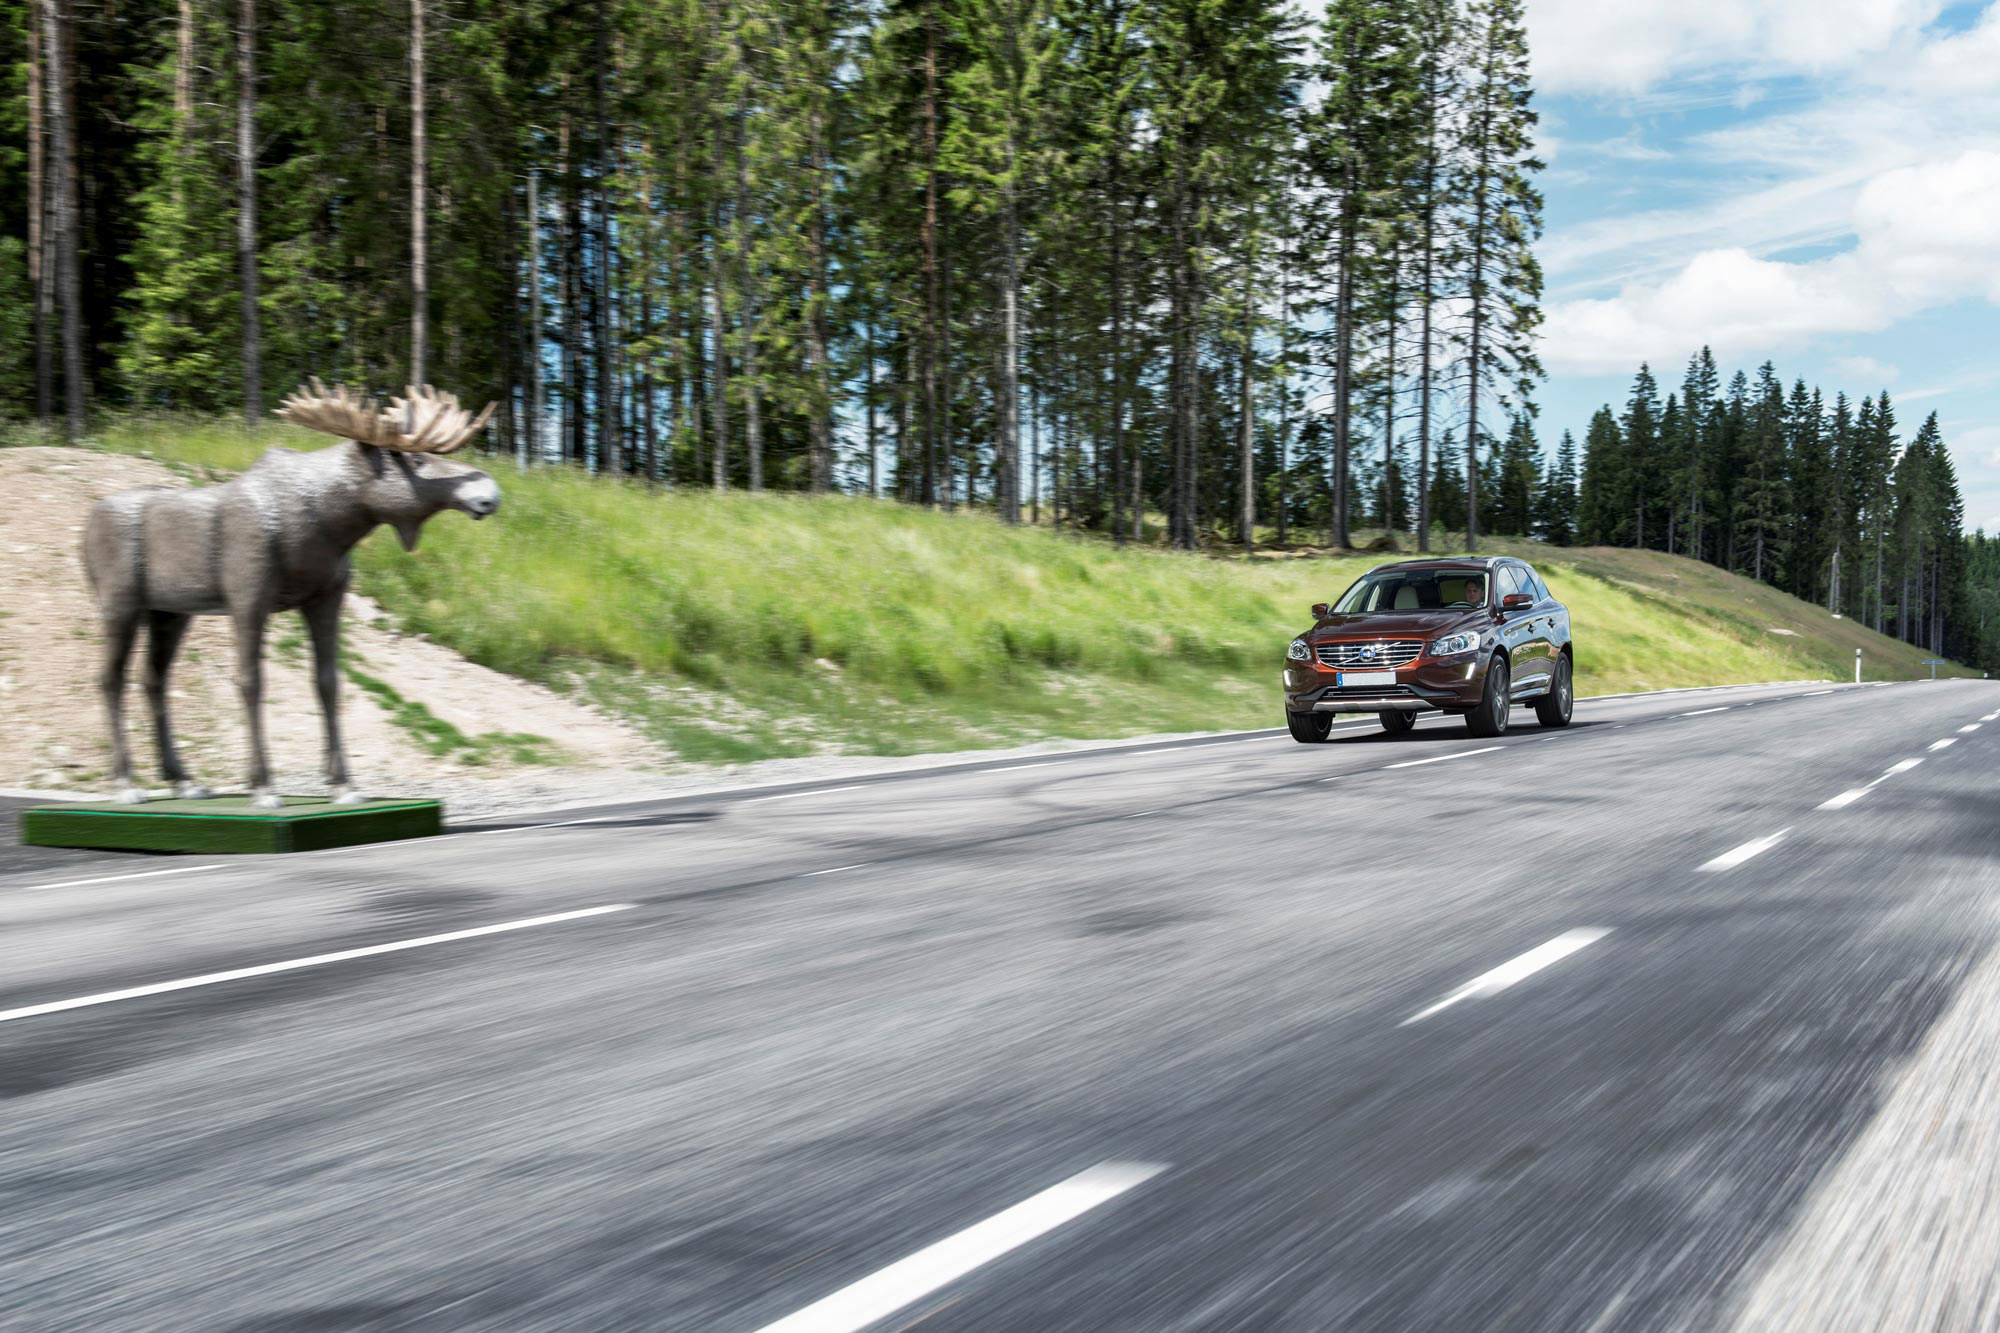 Volvo puts an XC60 through the moose test at its private testing facility